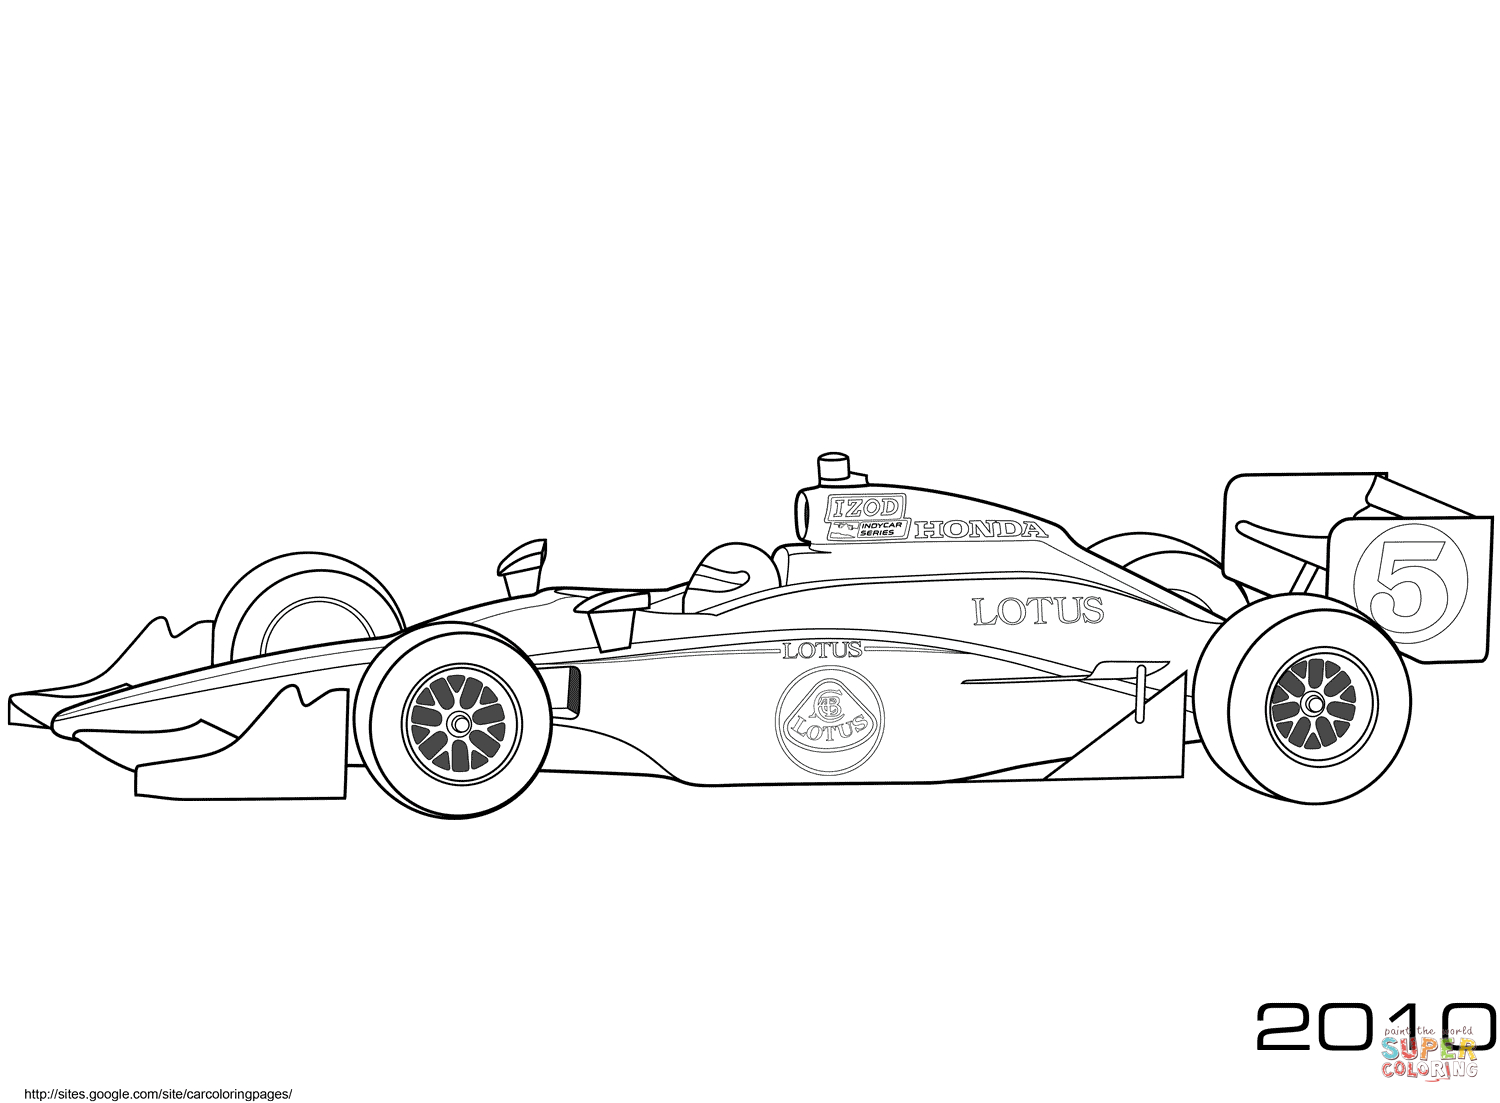 Blank Race Car Coloring Pages Intended For Blank Race Car Templates